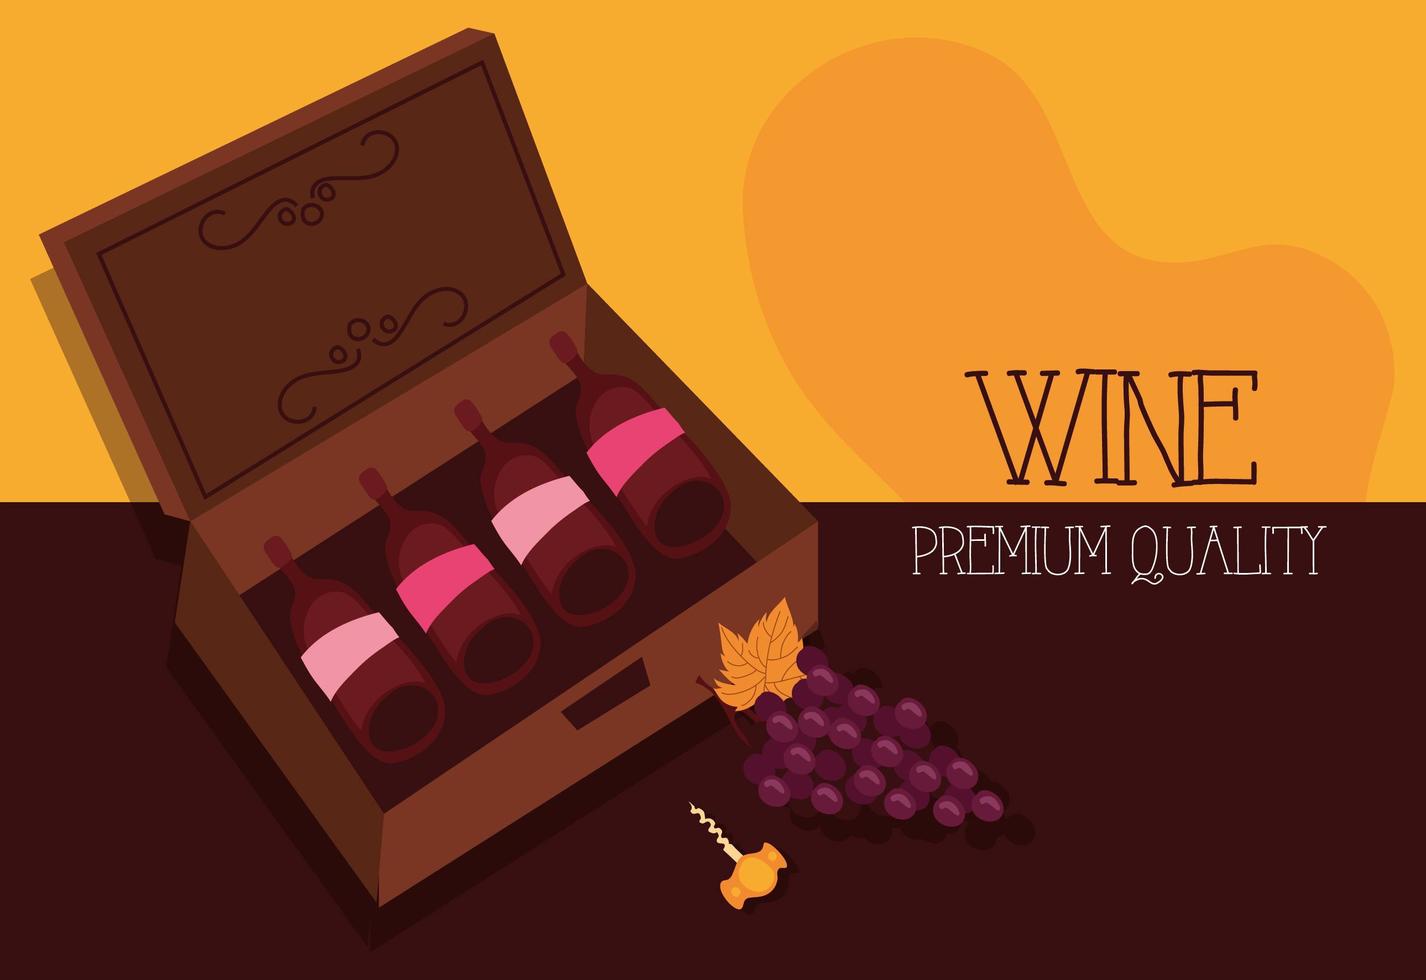 wine premium quality poster with bottles and grapes vector